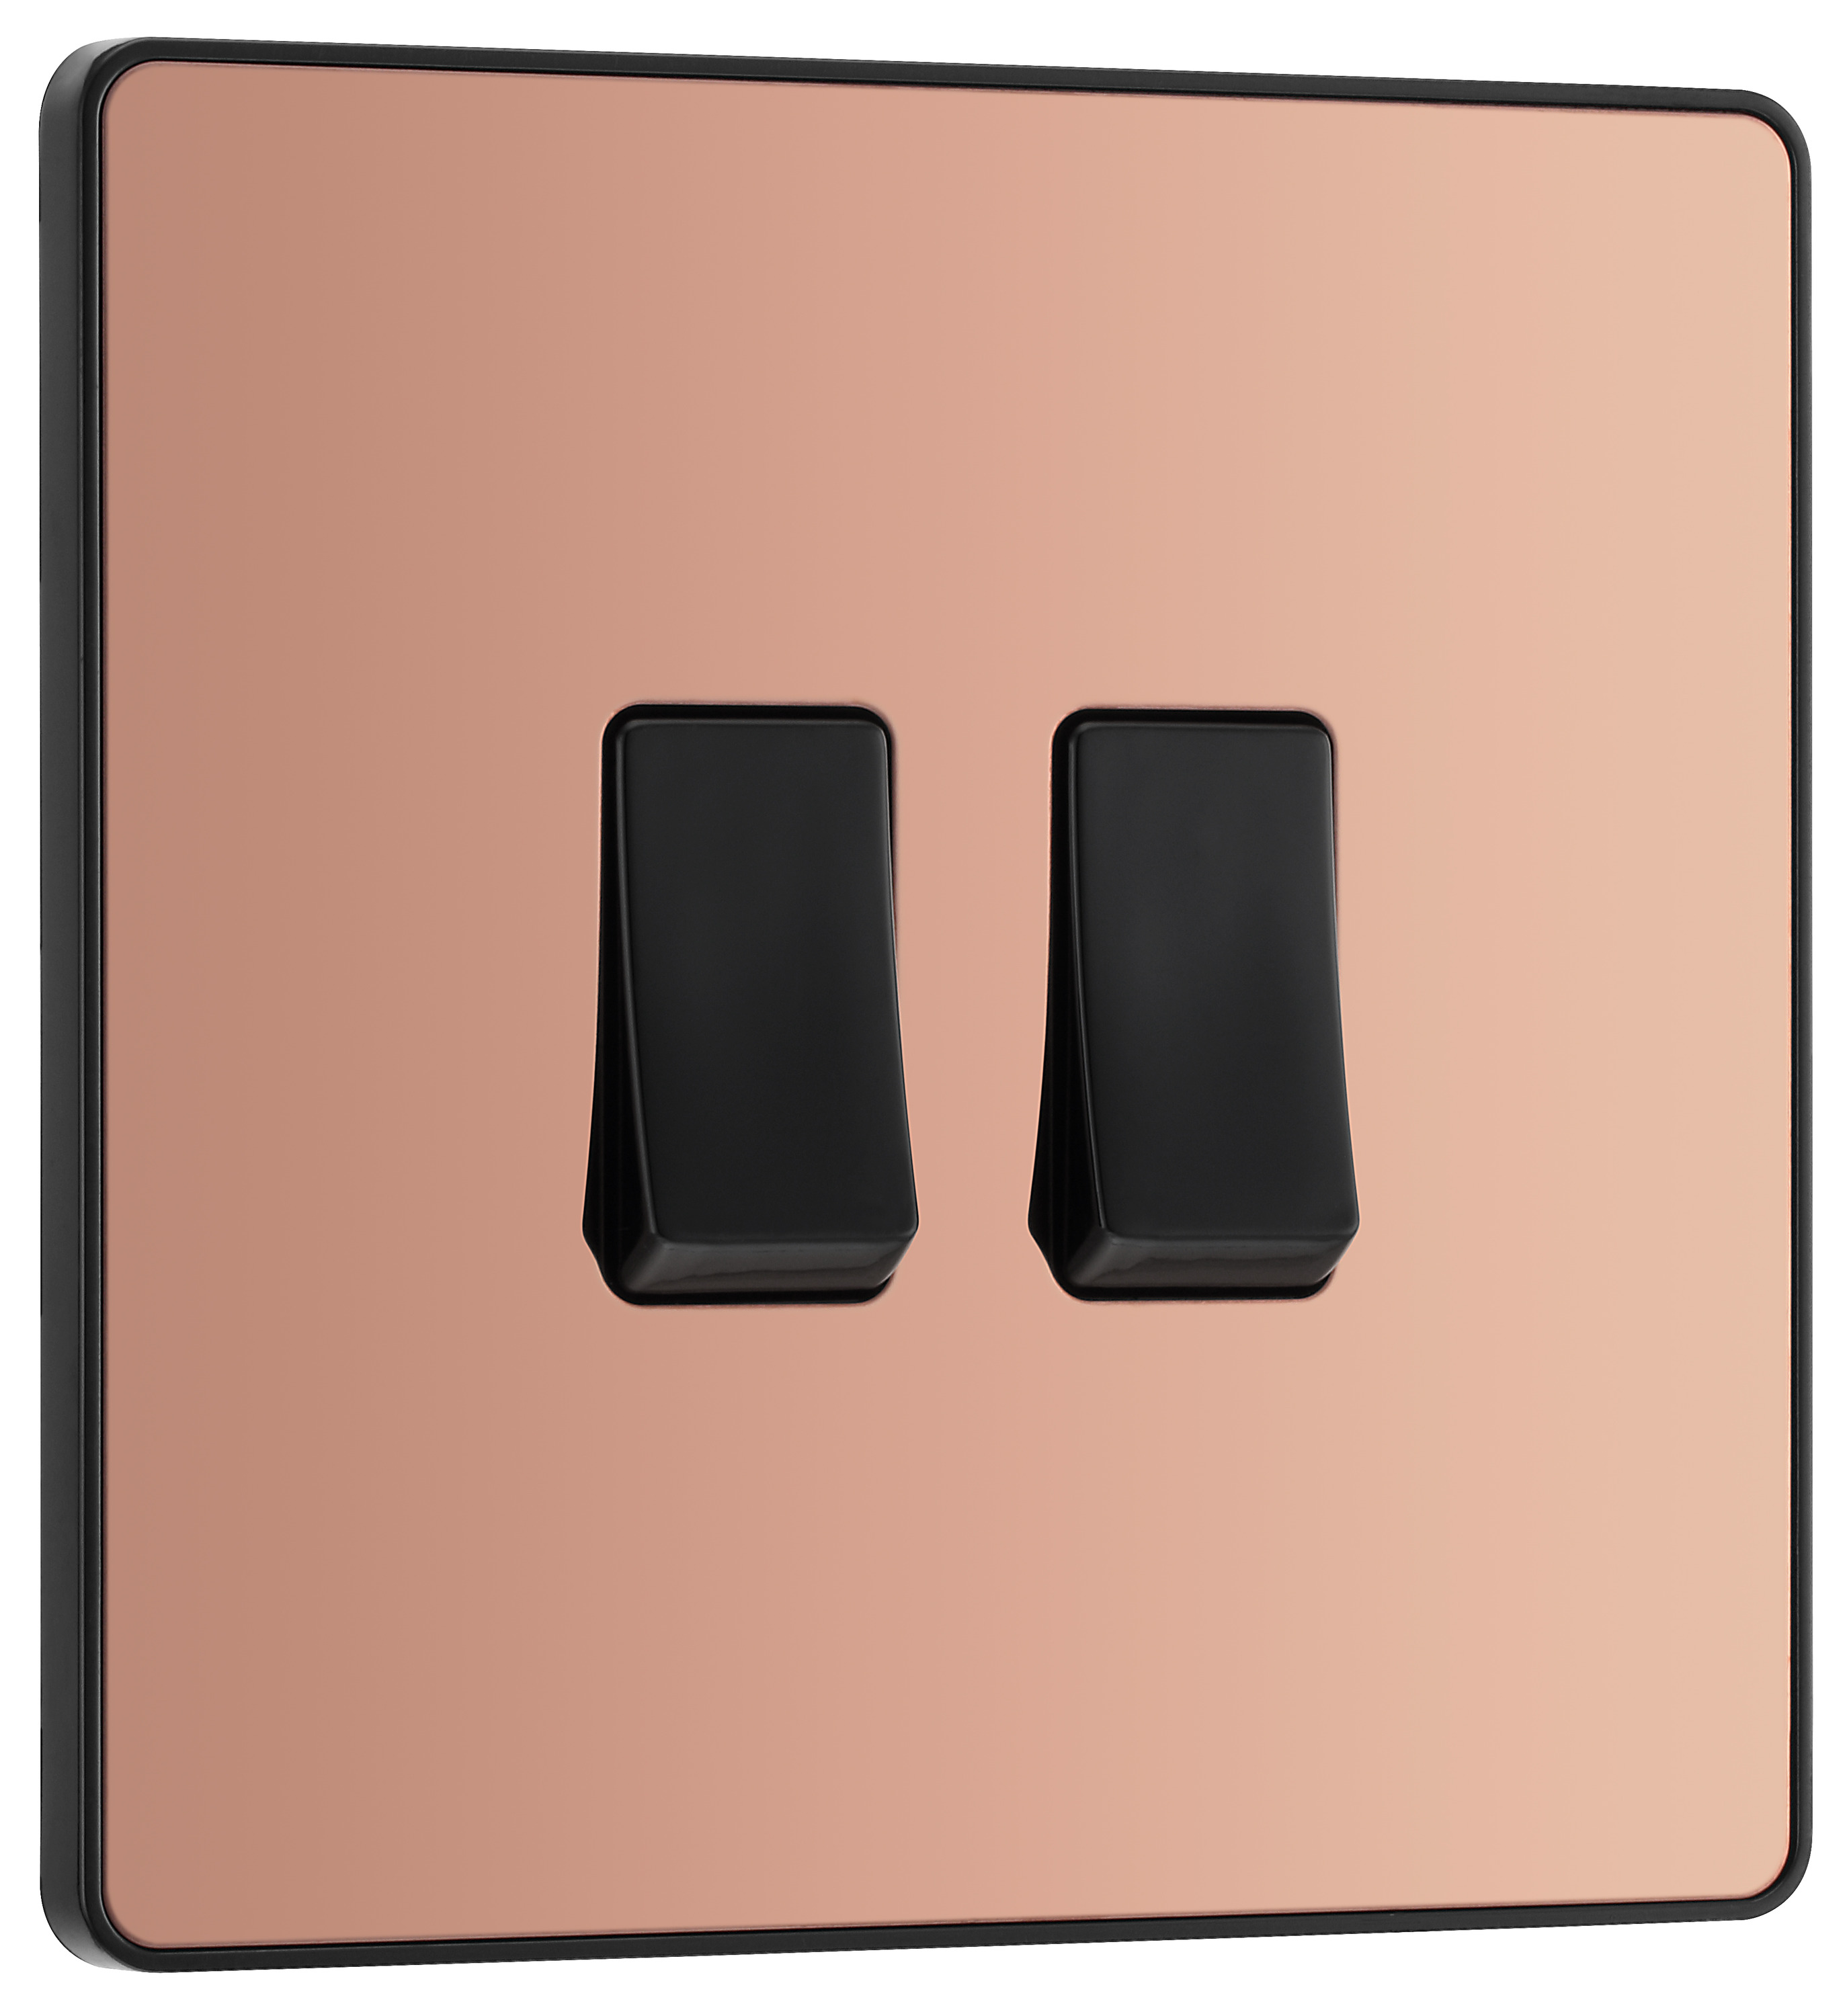 BG Evolve Polished Copper 20A 16Ax Double Light Switch - 2 Way